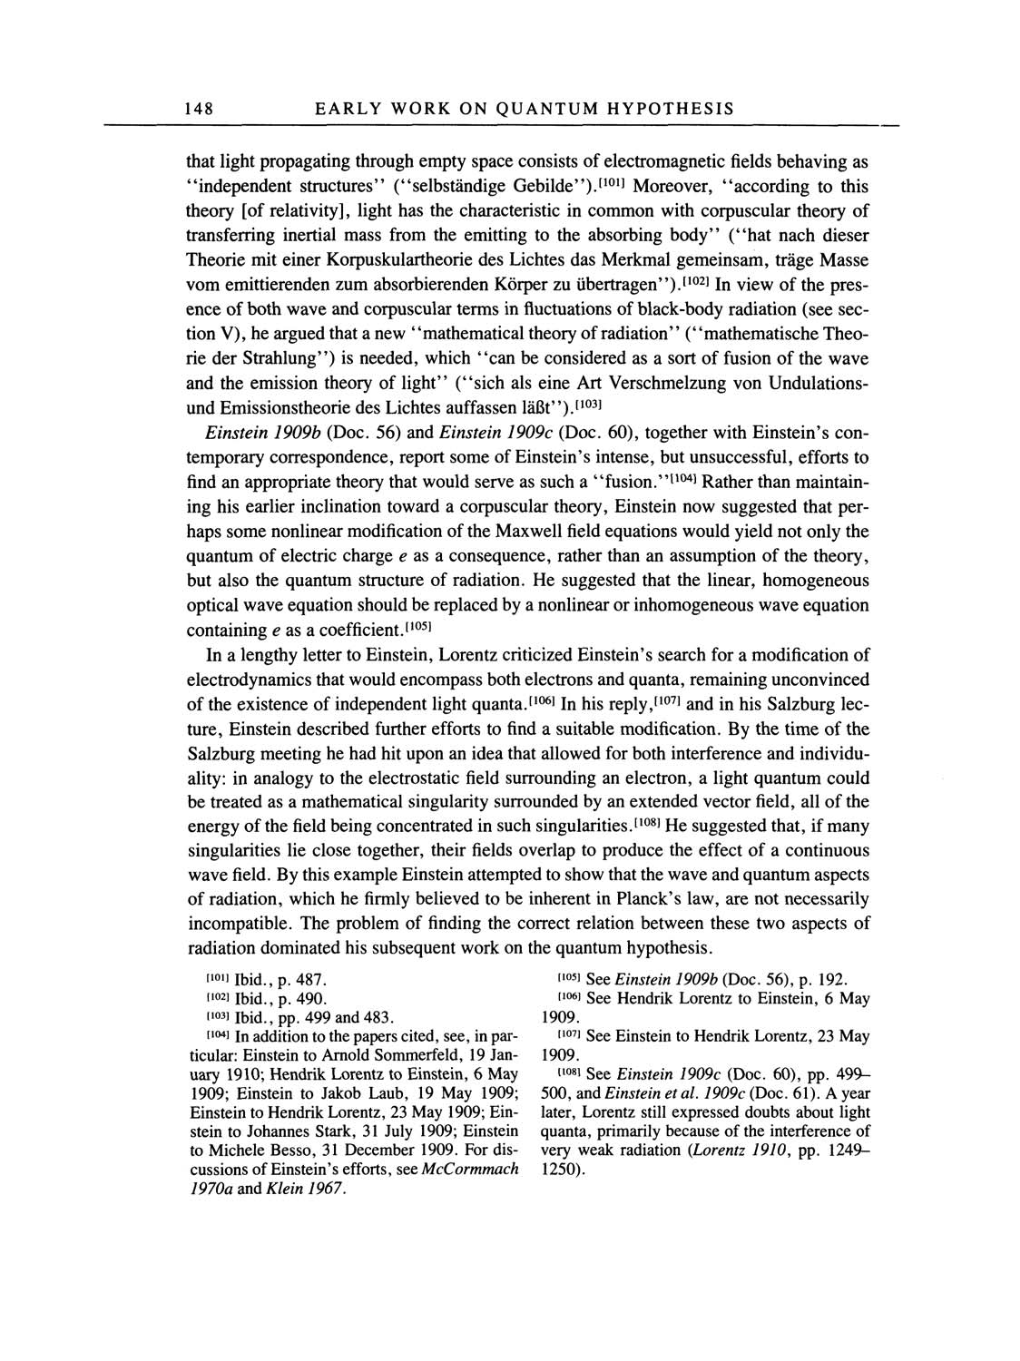 Volume 2: The Swiss Years: Writings, 1900-1909 page 148